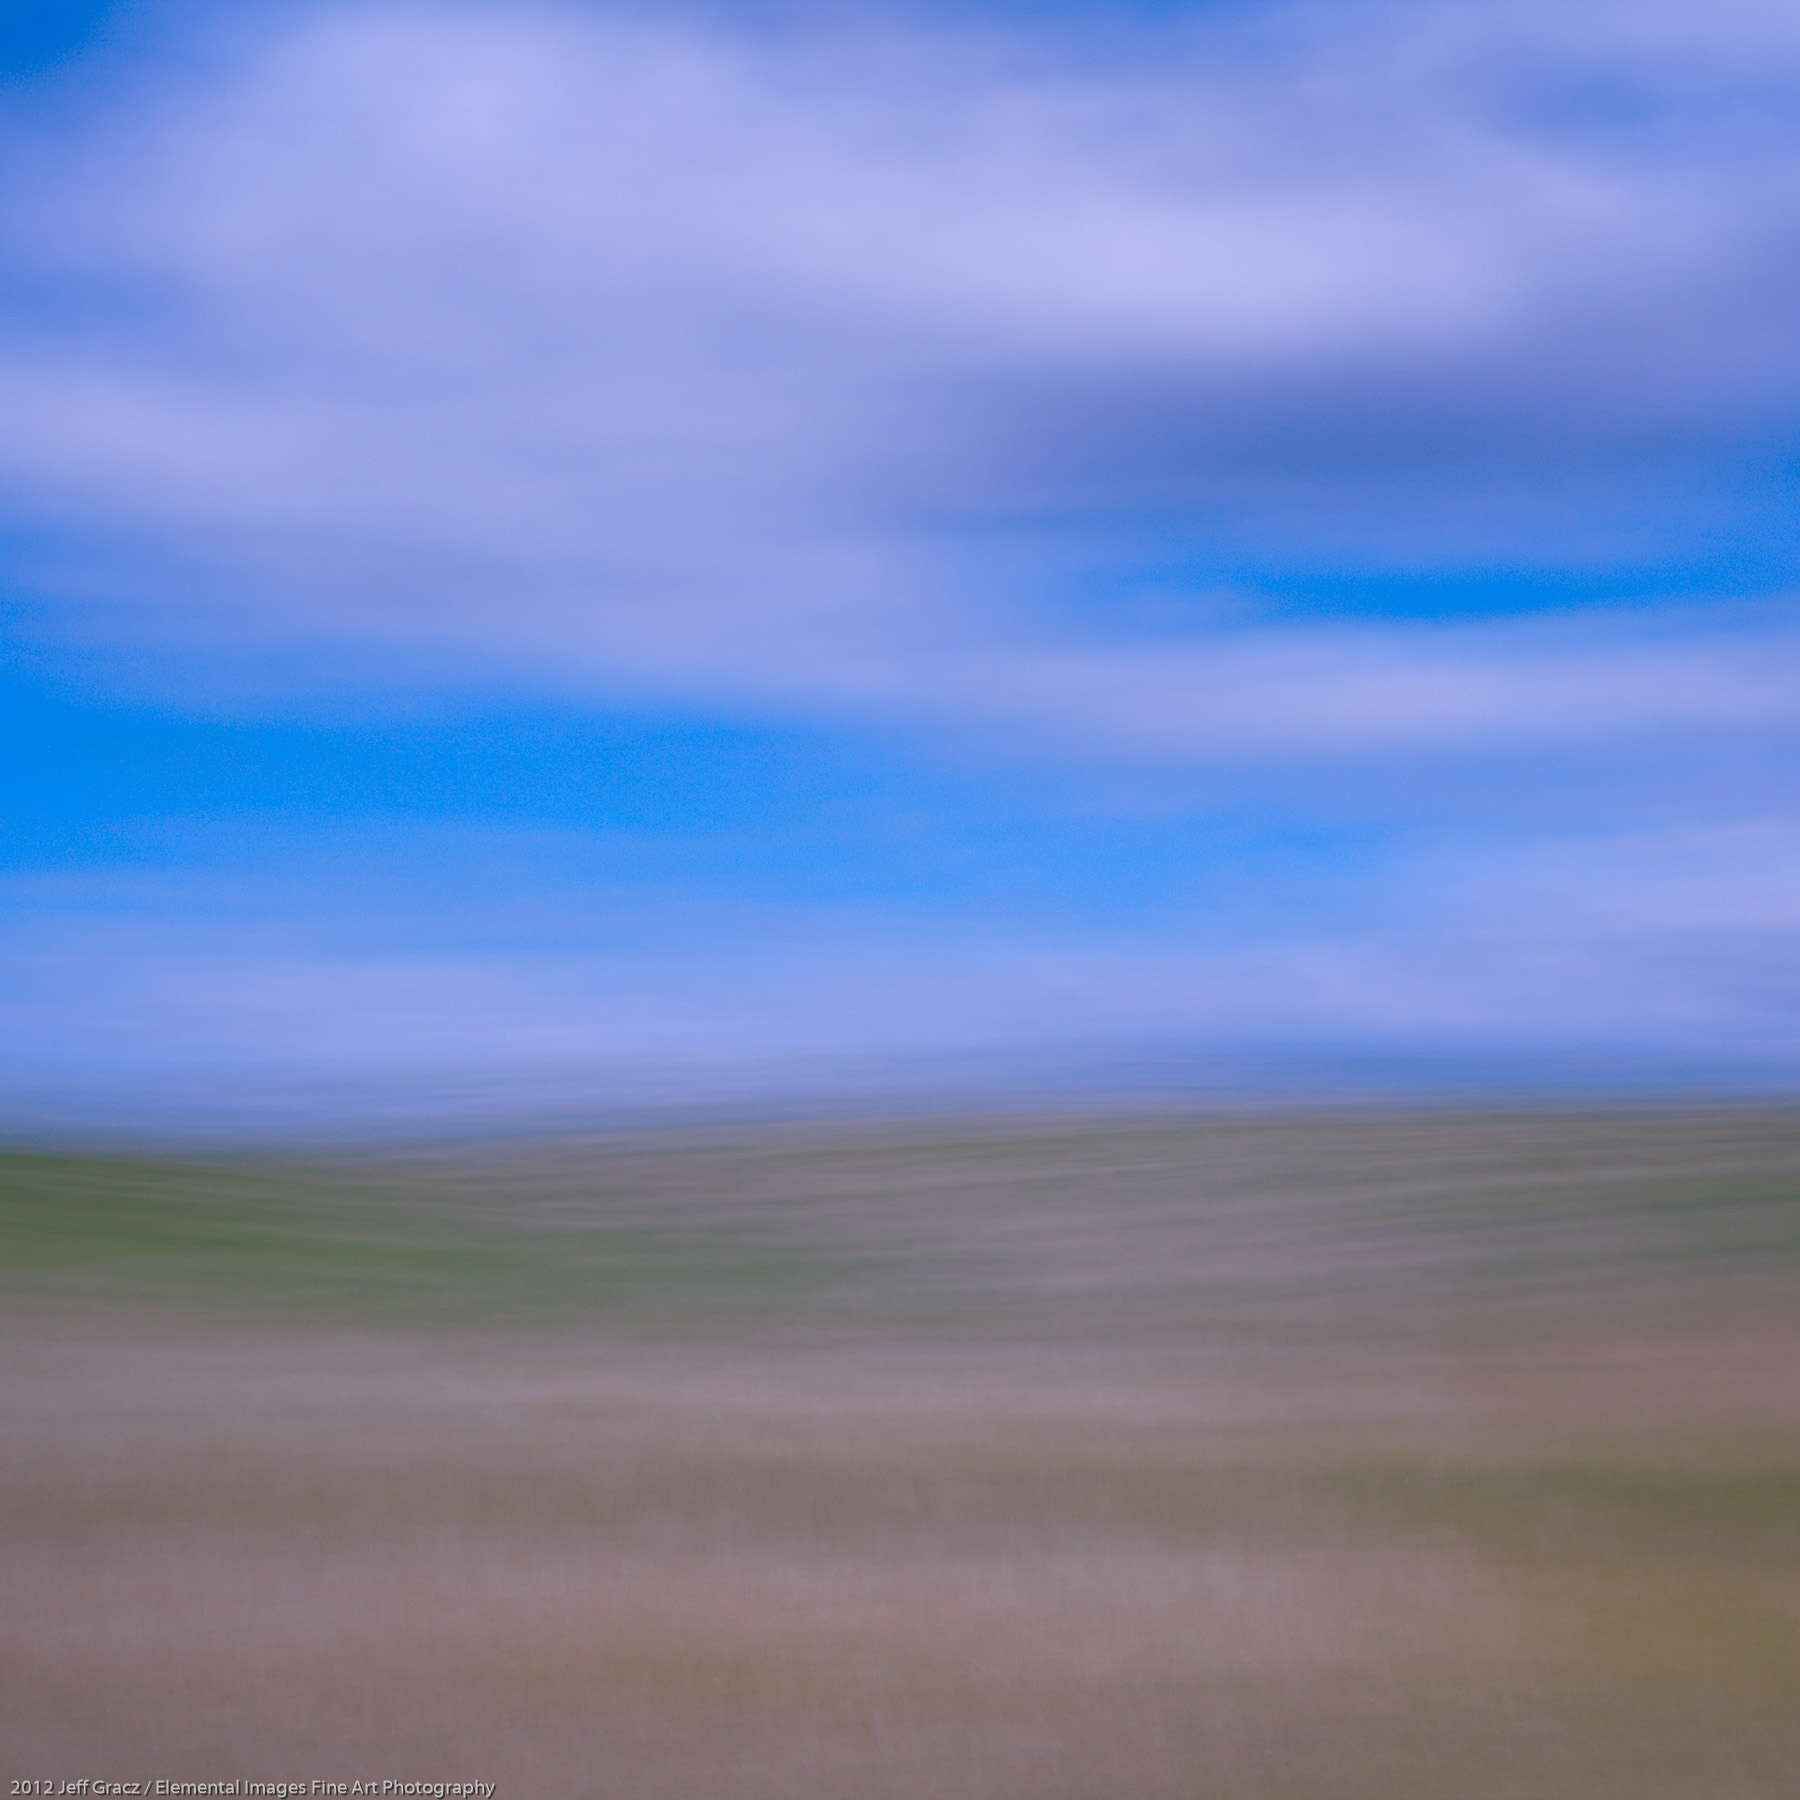 Impressions of The Palouse #12 |  |  | USA - © 2012 Jeff Gracz / Elemental Images Fine Art Photography - All Rights Reserved Worldwide